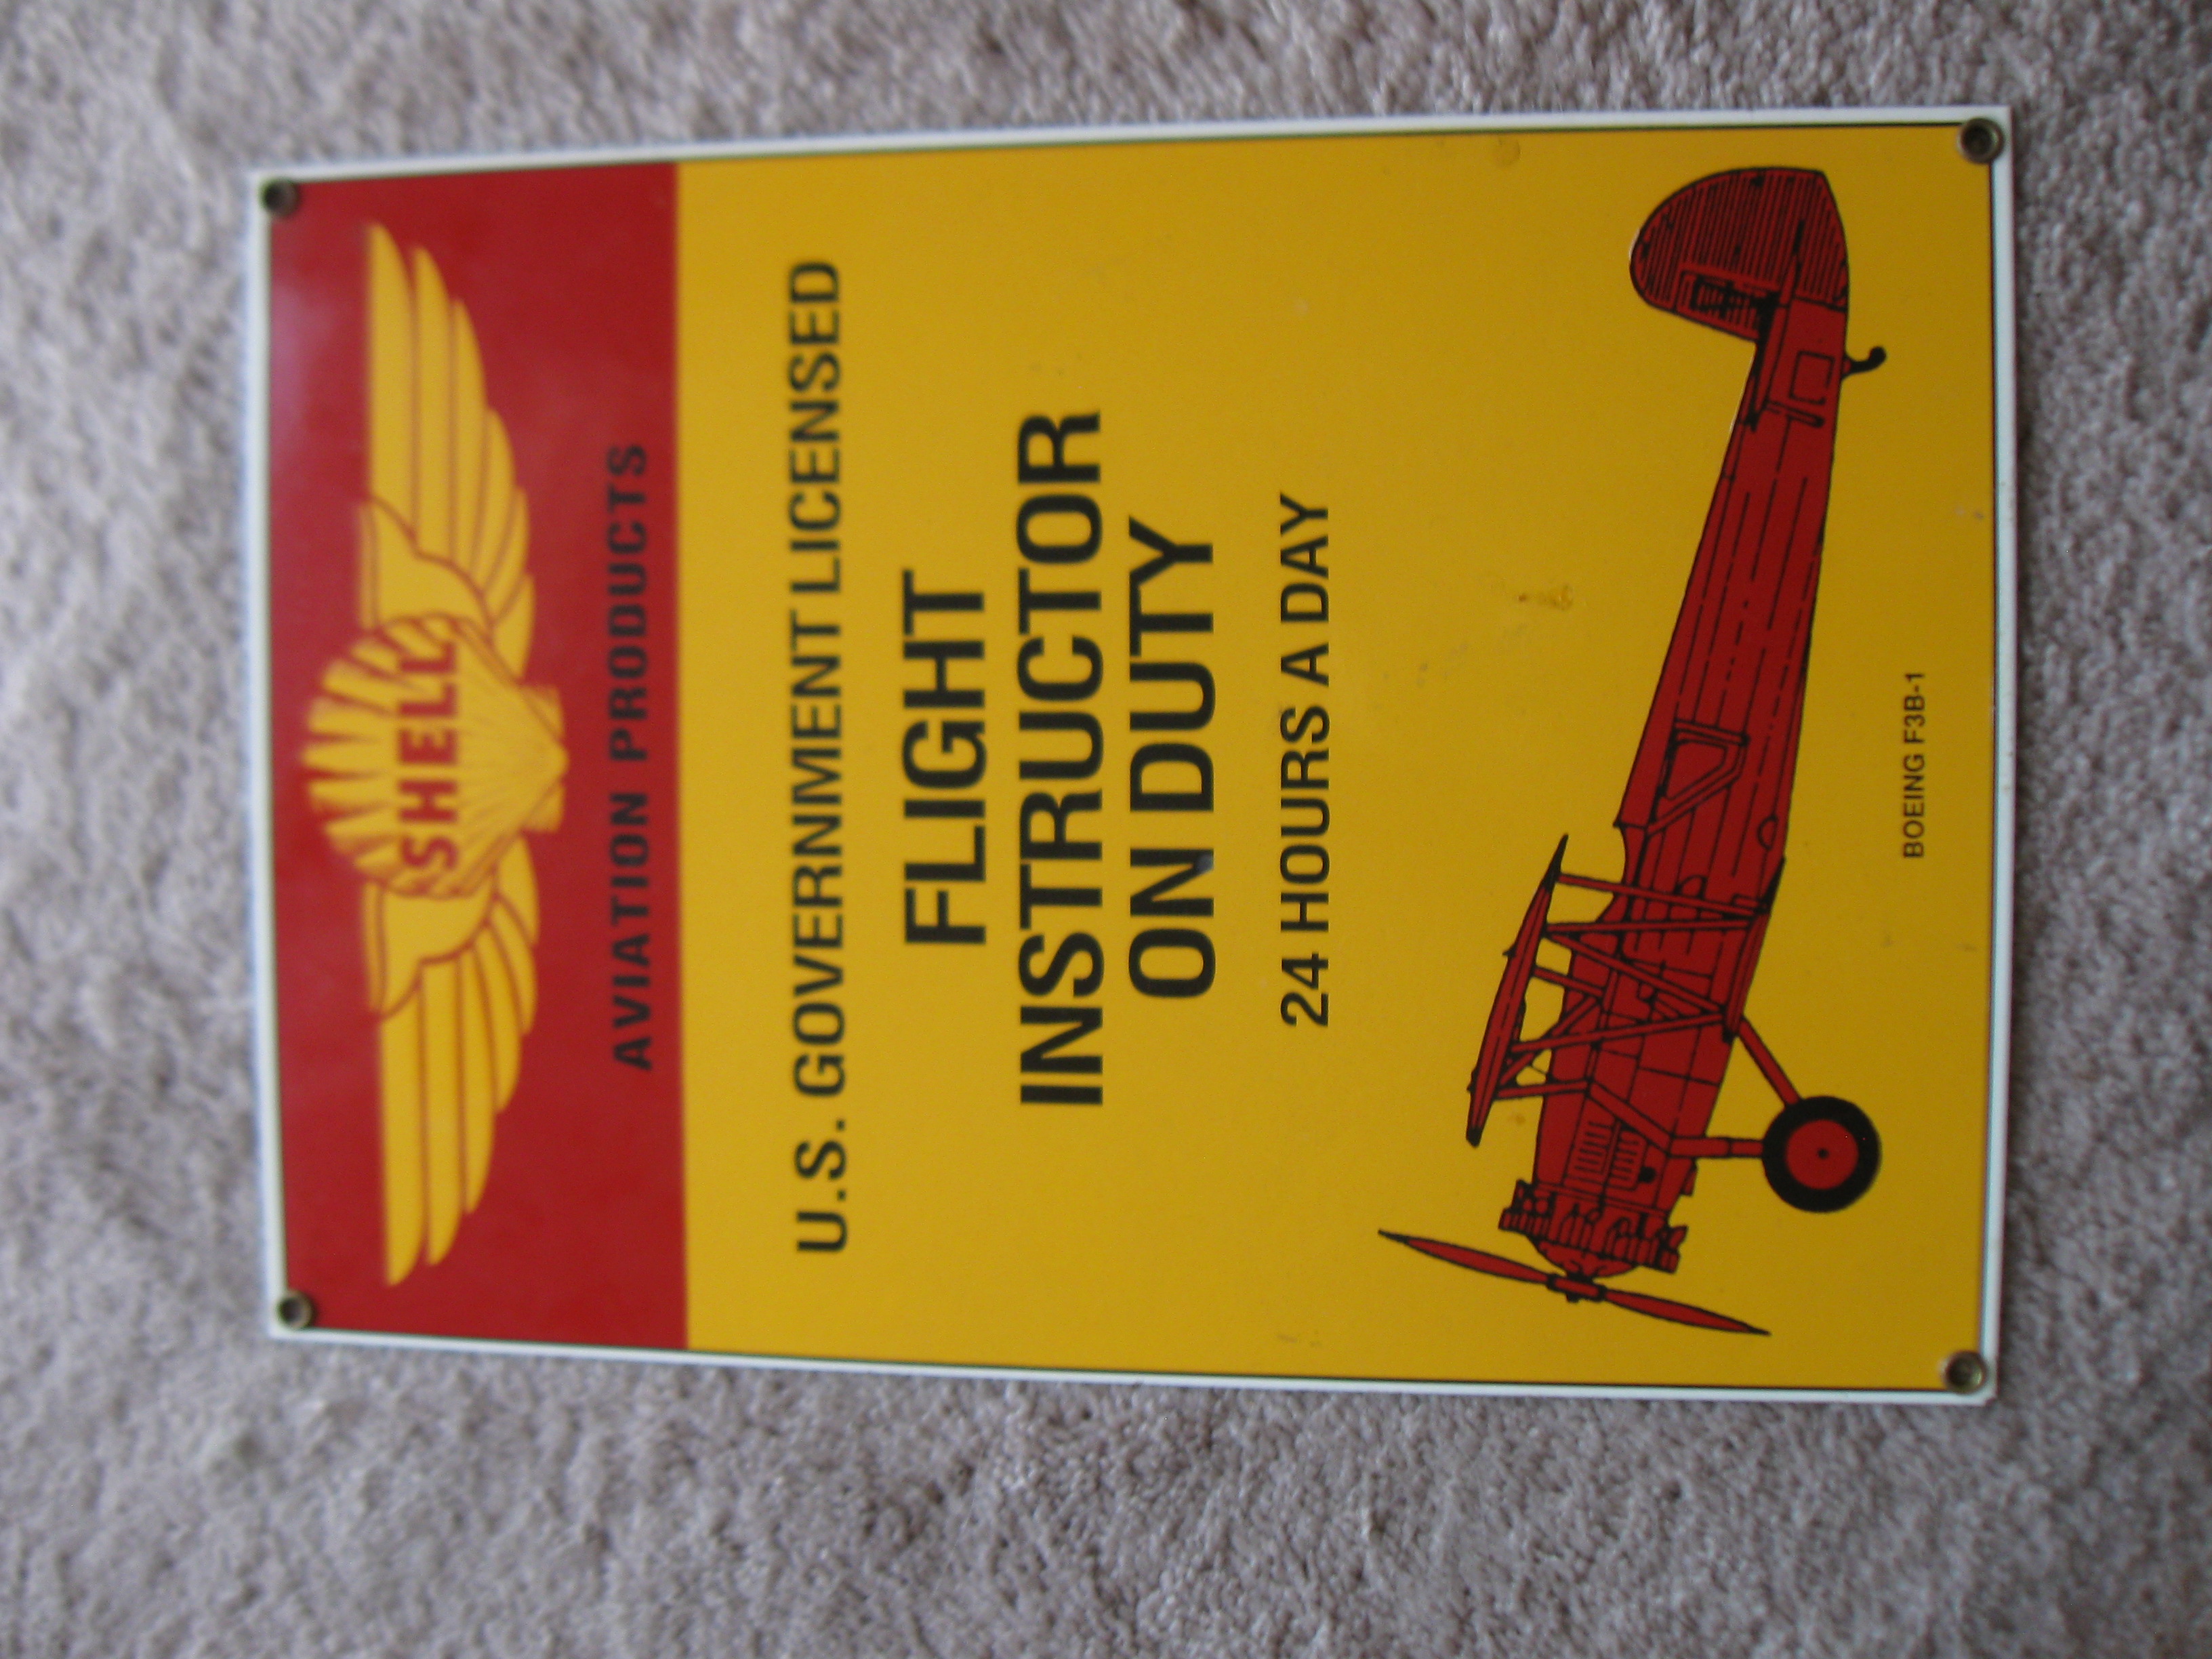 Flight Instructor on Duty porcelain sign reproduction